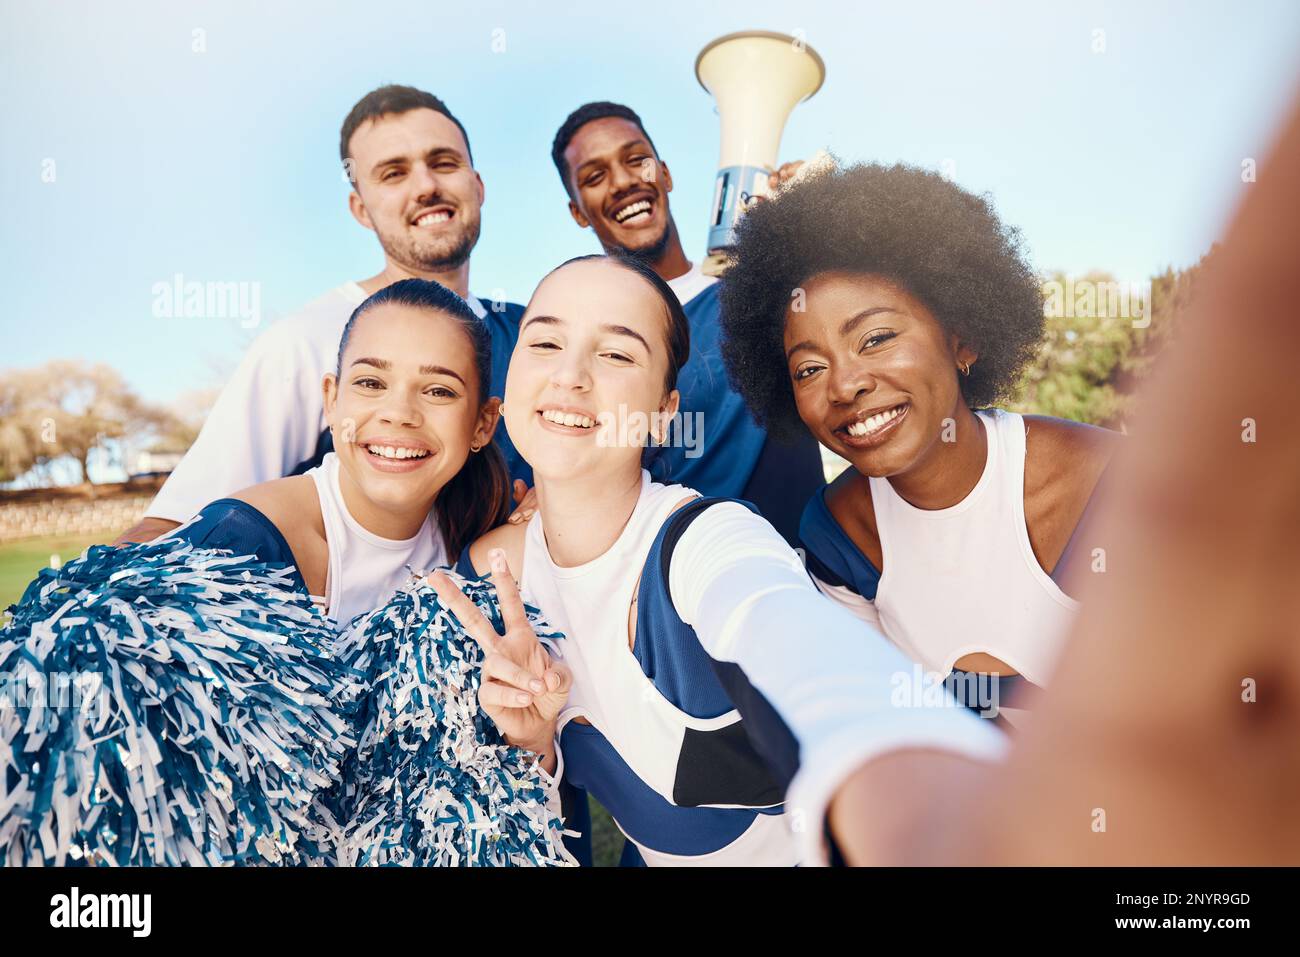 Selfie, team and cheerleader friends outdoor, sports and smile with victory, netball and excited together. Portrait, men and women outside, happiness Stock Photo